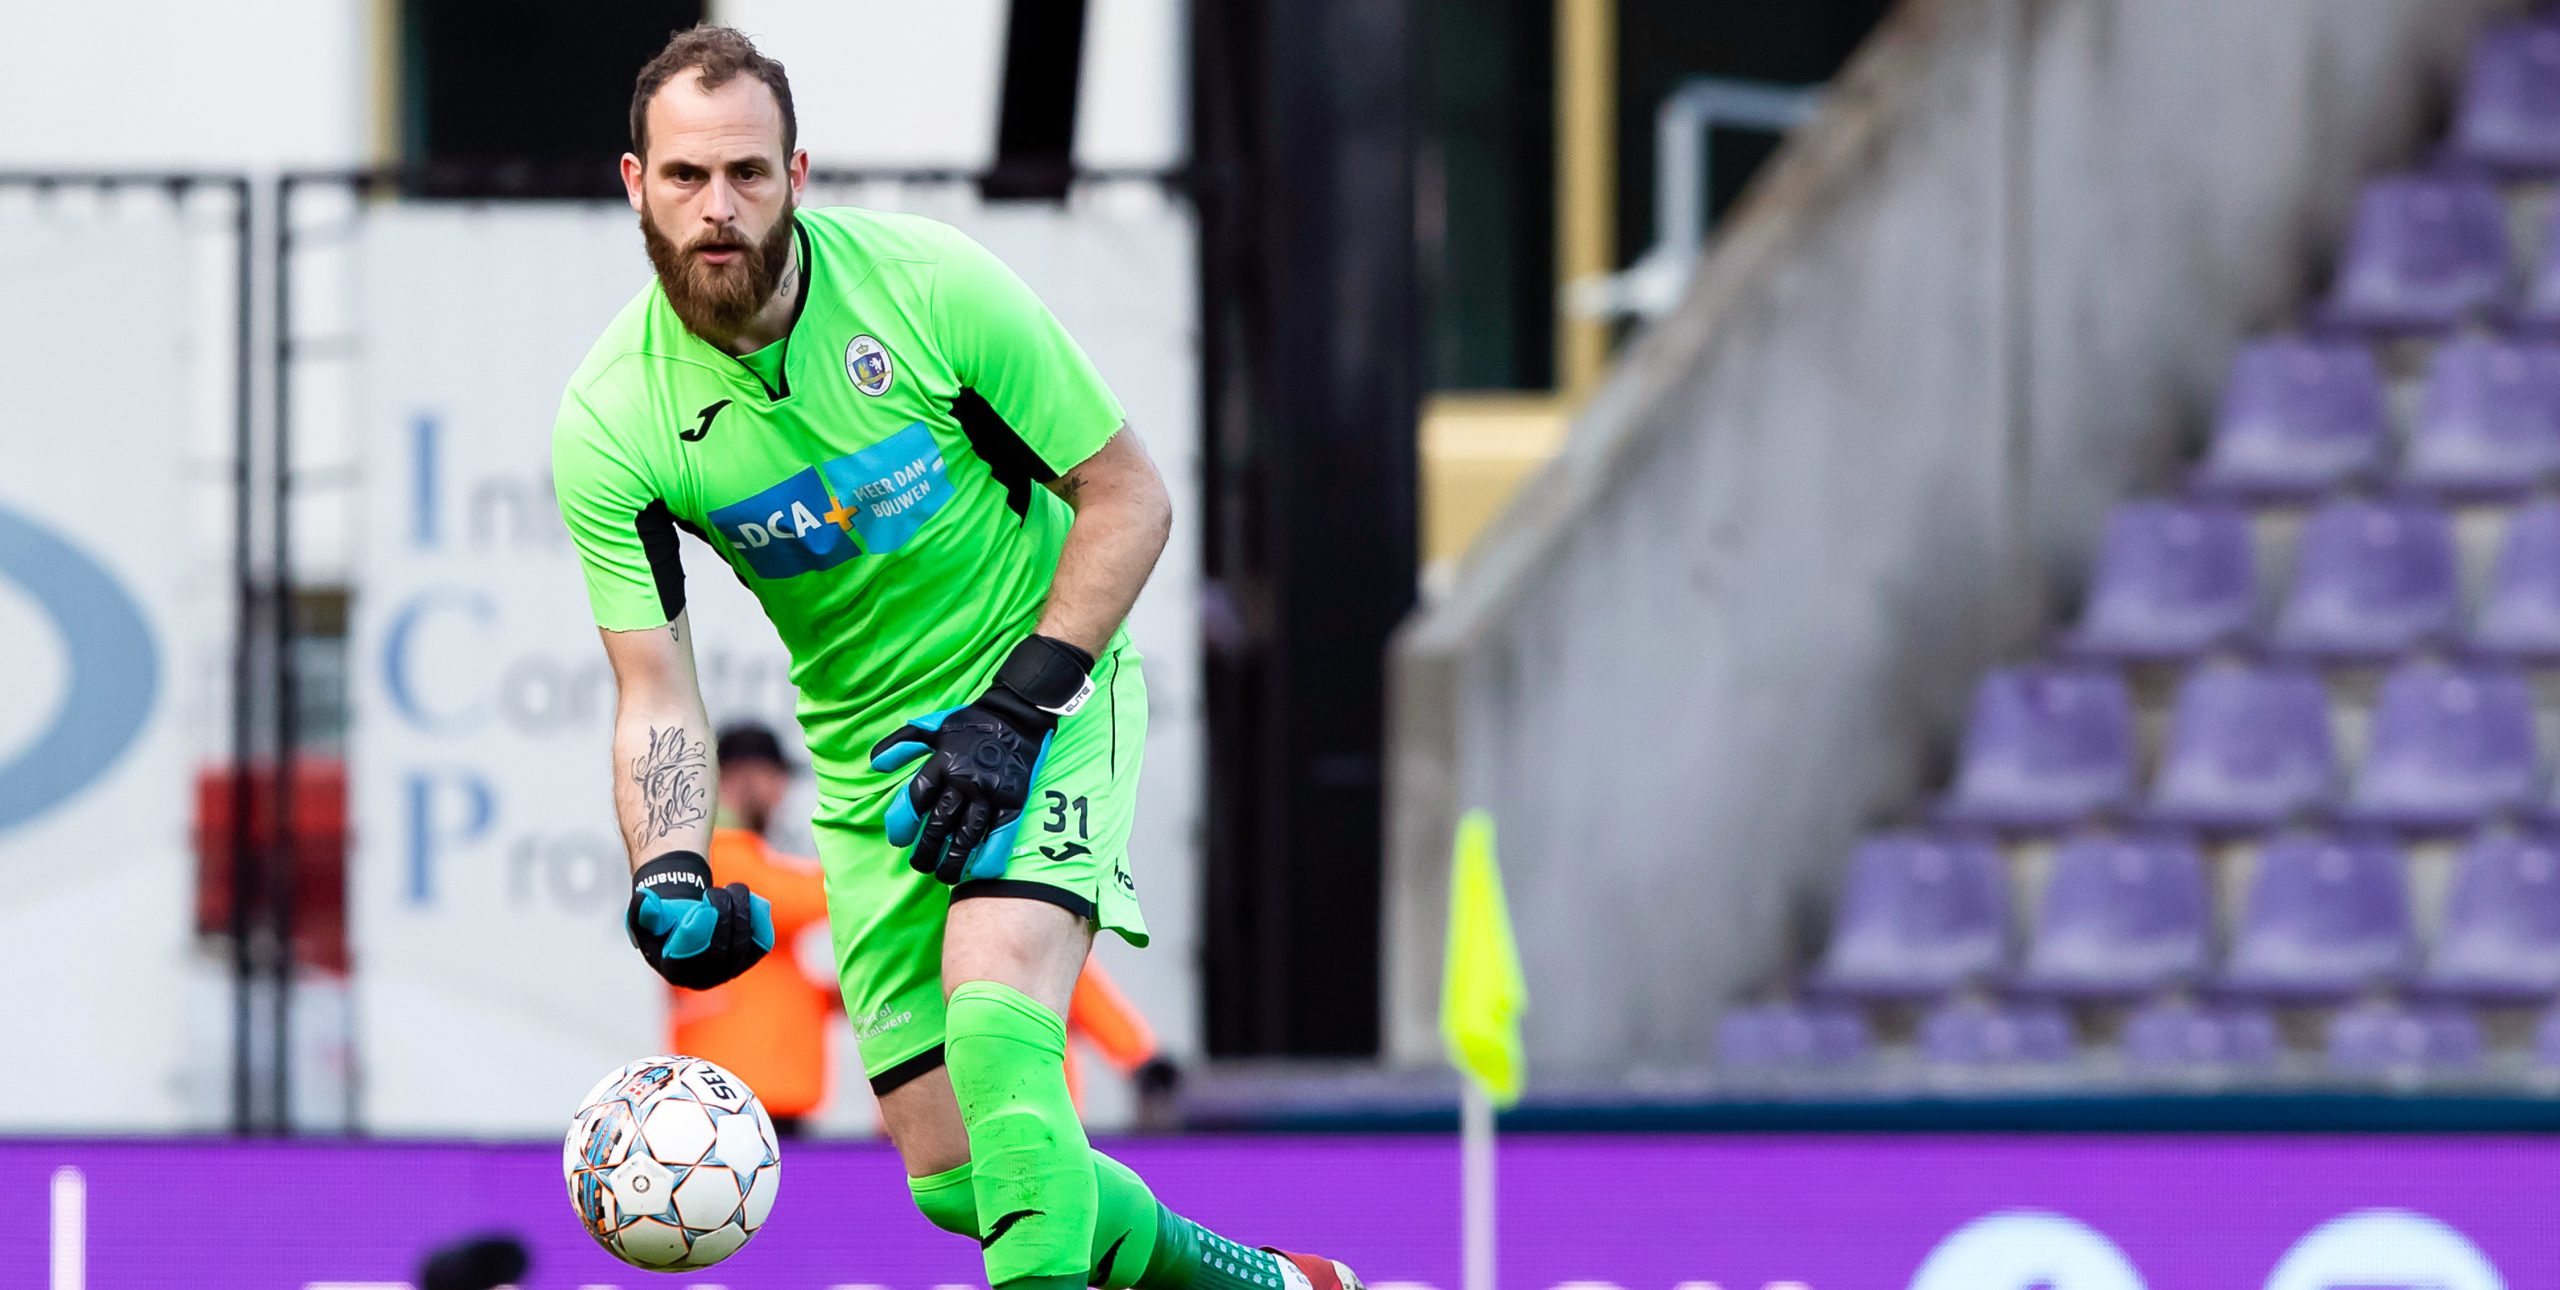 Beerschot goalkeeper Mike Vanhamel in possession during a Proximus League game